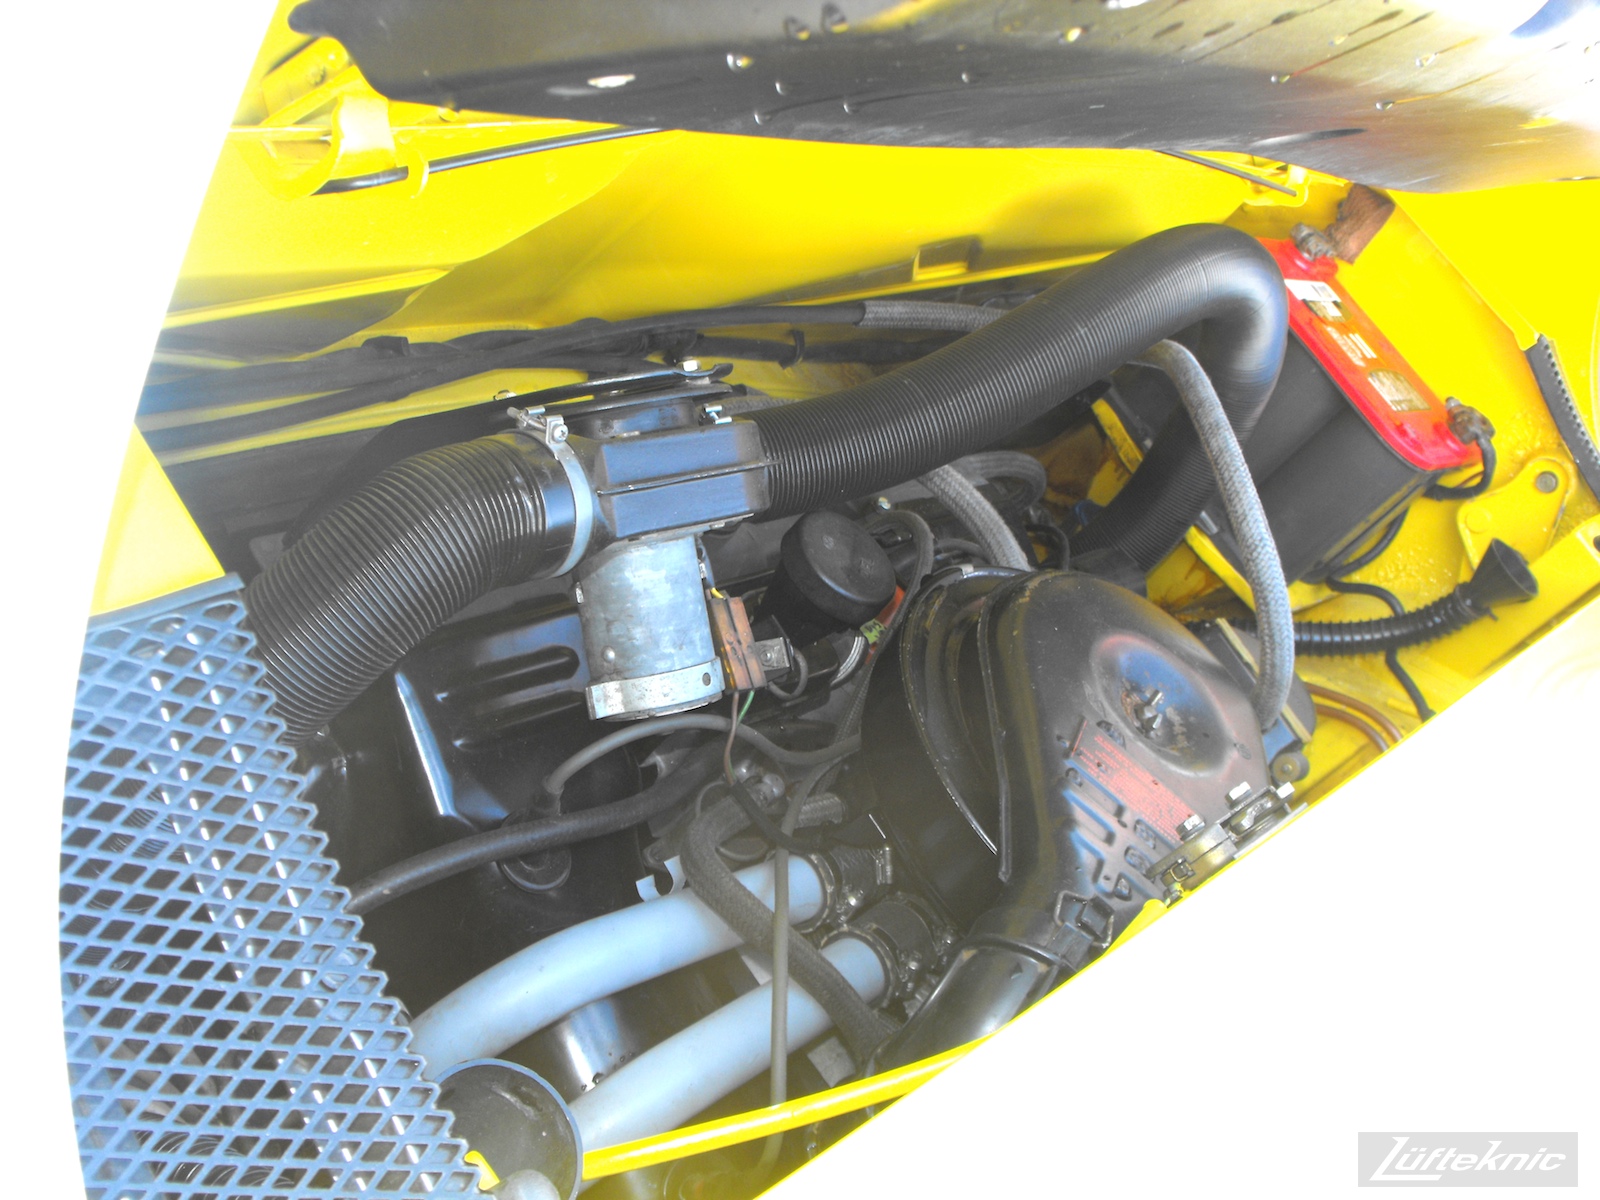 Engine detail photo of a completely restored yellow Porsche 914 posing in the parking lot of Lufteknic.